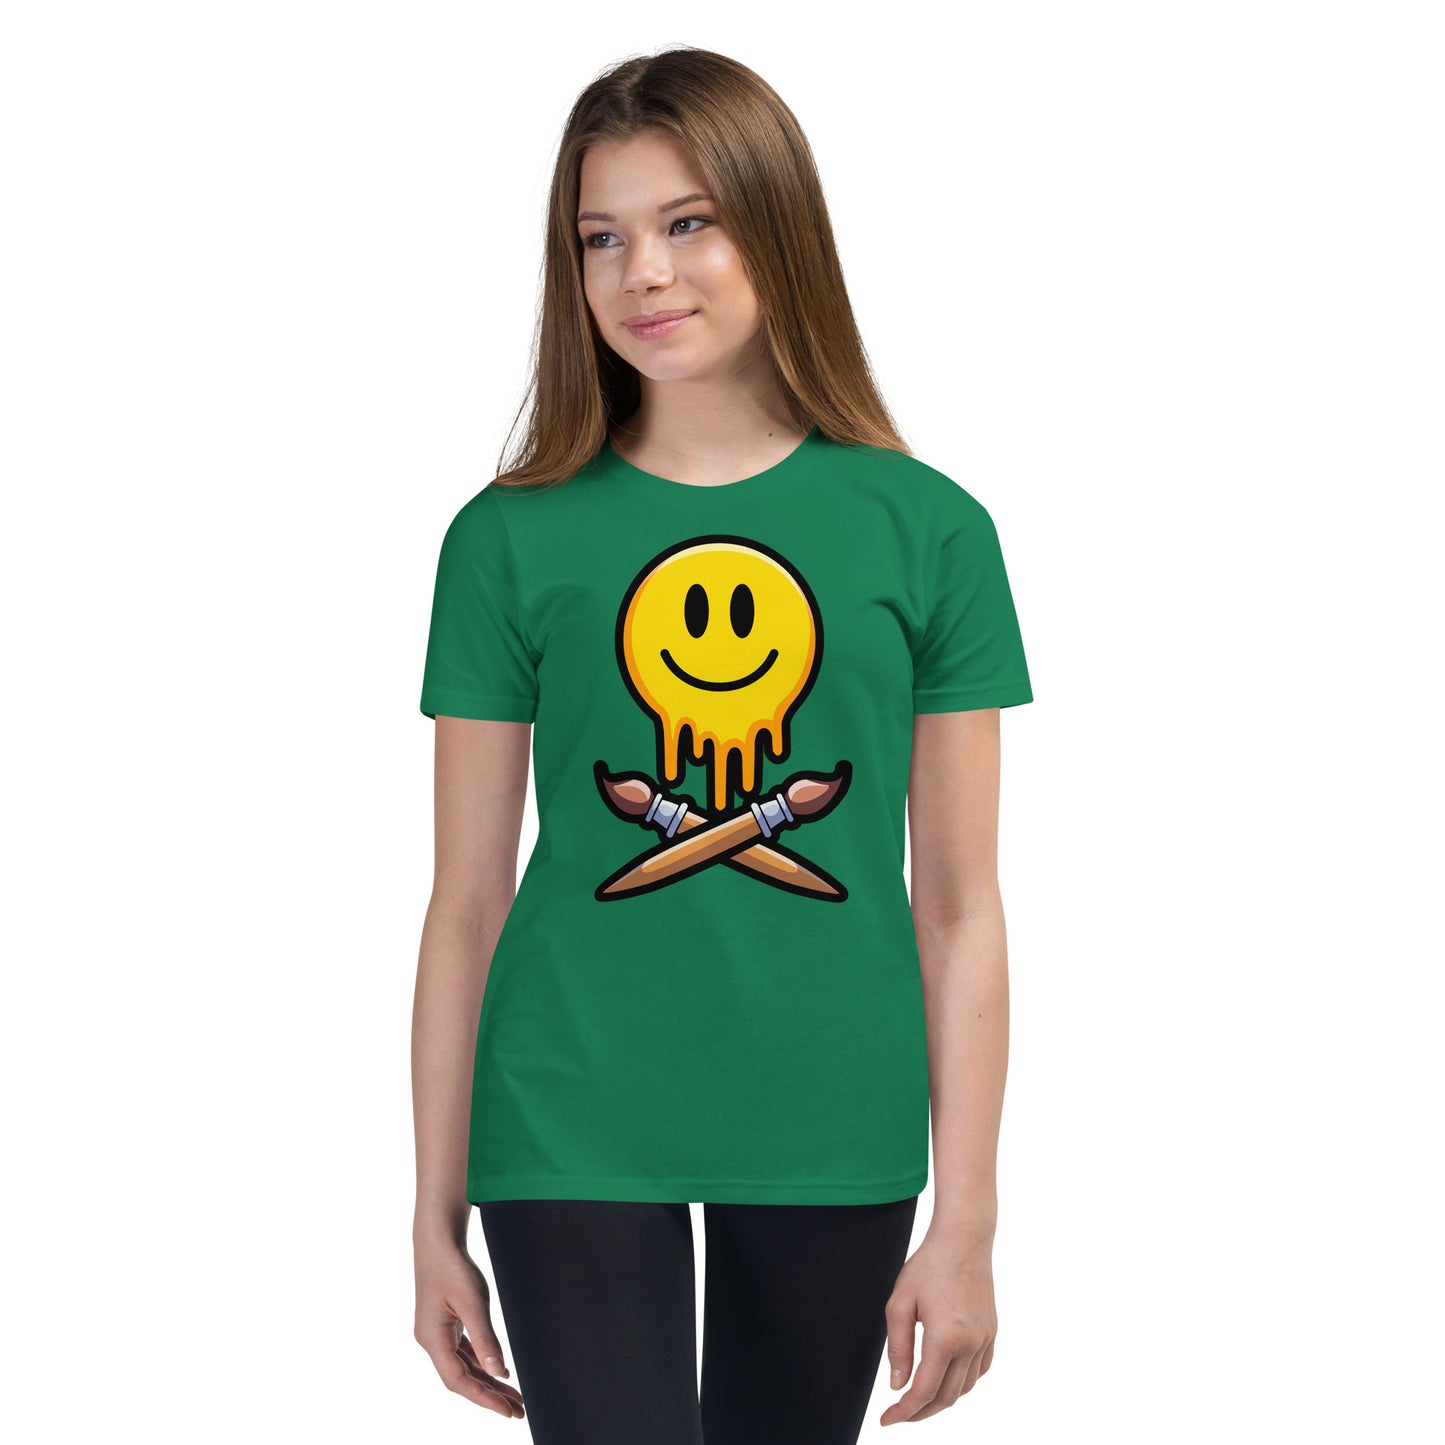 Clothing - The Grinning Painter Kids T-Shirt - Front Print